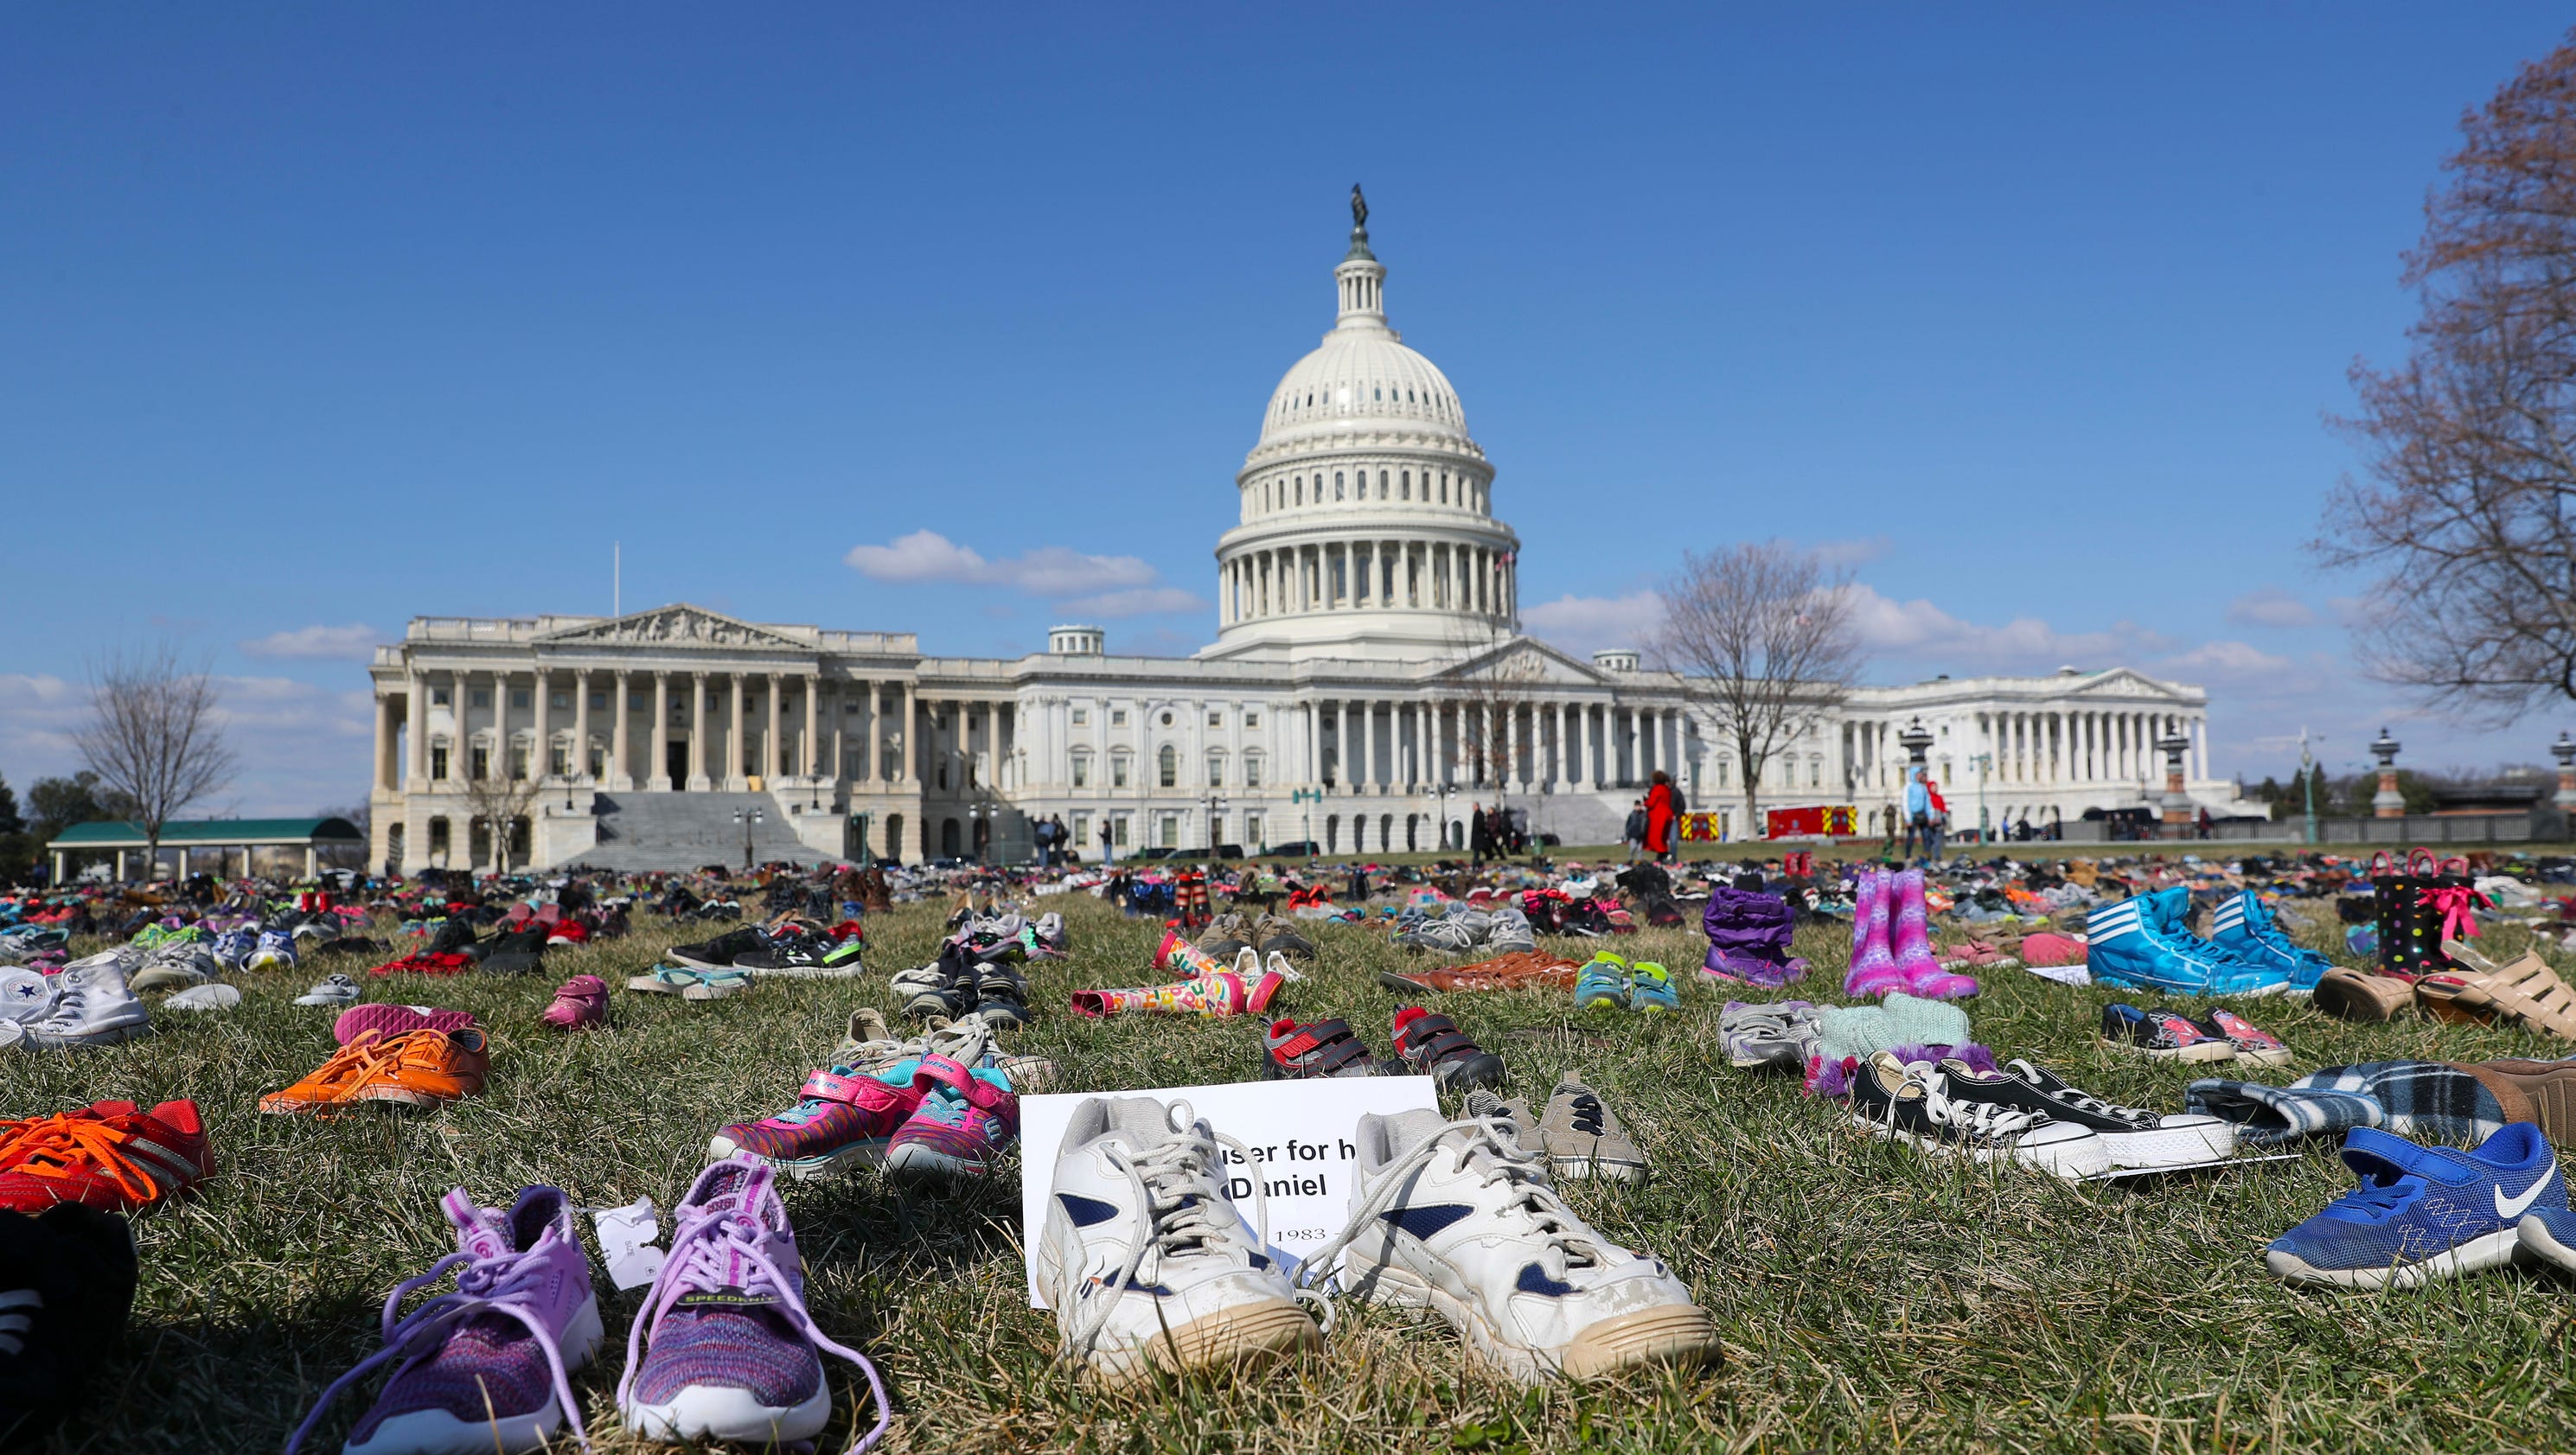 7,000 pairs of shoes were outside U.S. Capitol to represent children killed by guns